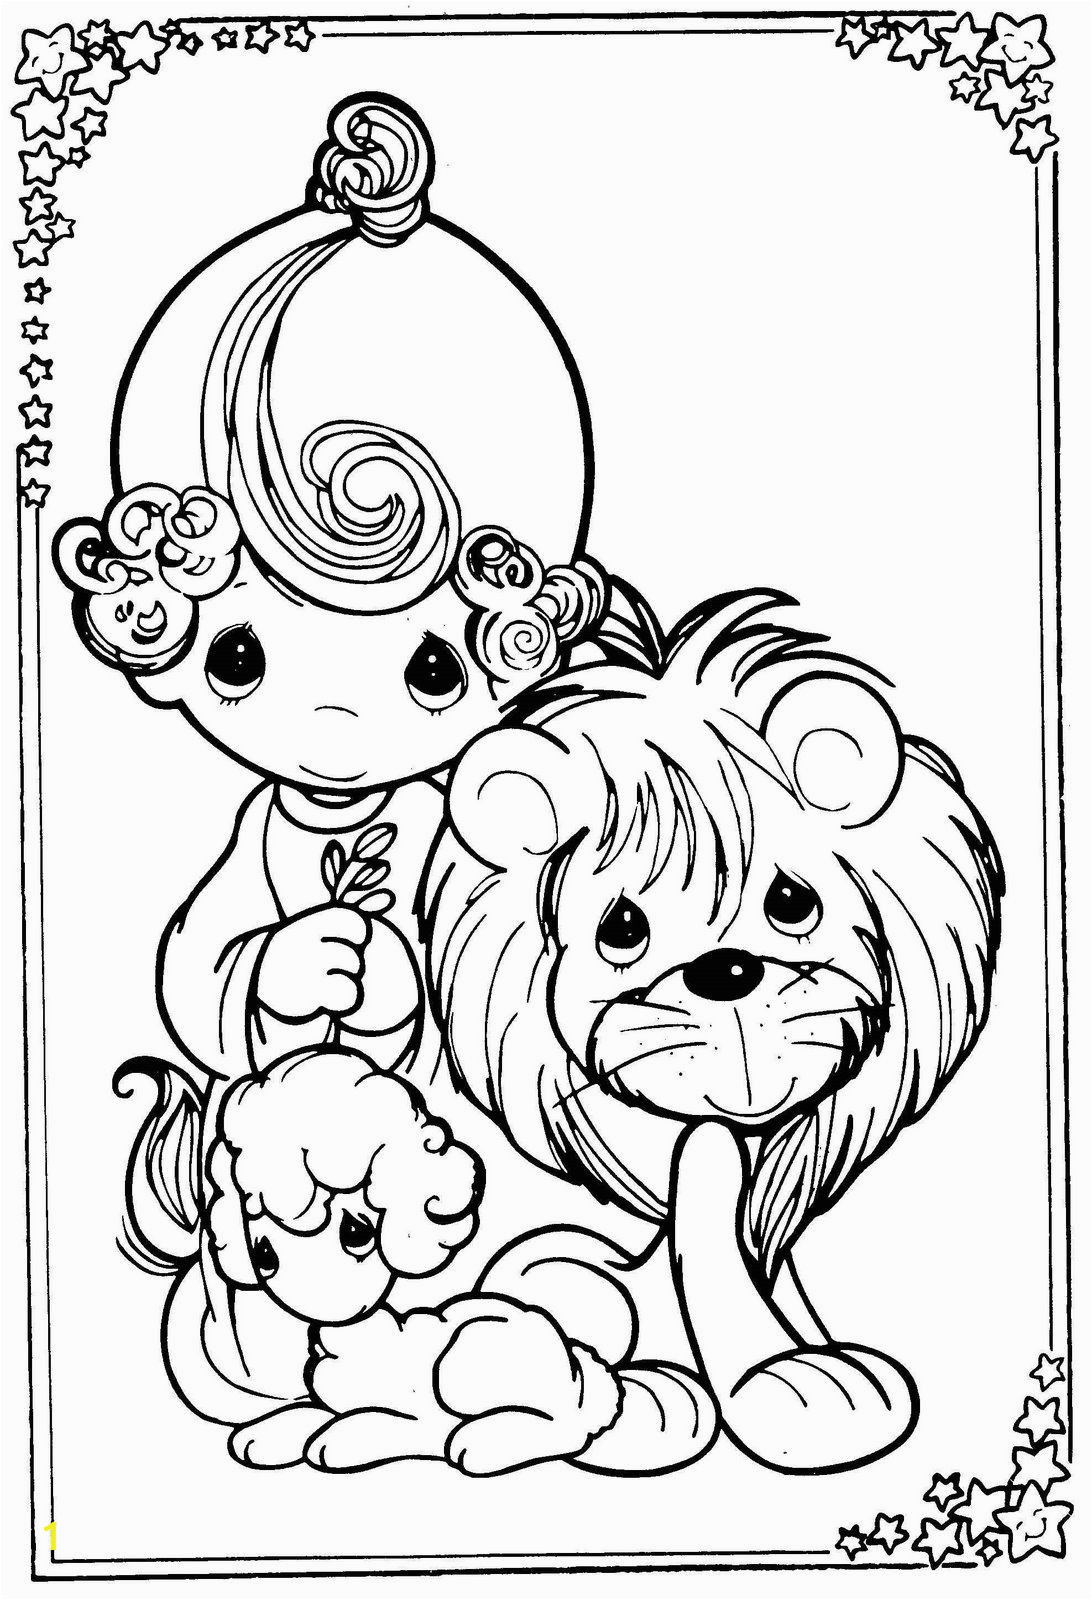 Boy Easter Coloring Pages Tattoo Idea the Lion and Lamb Represent My Children their